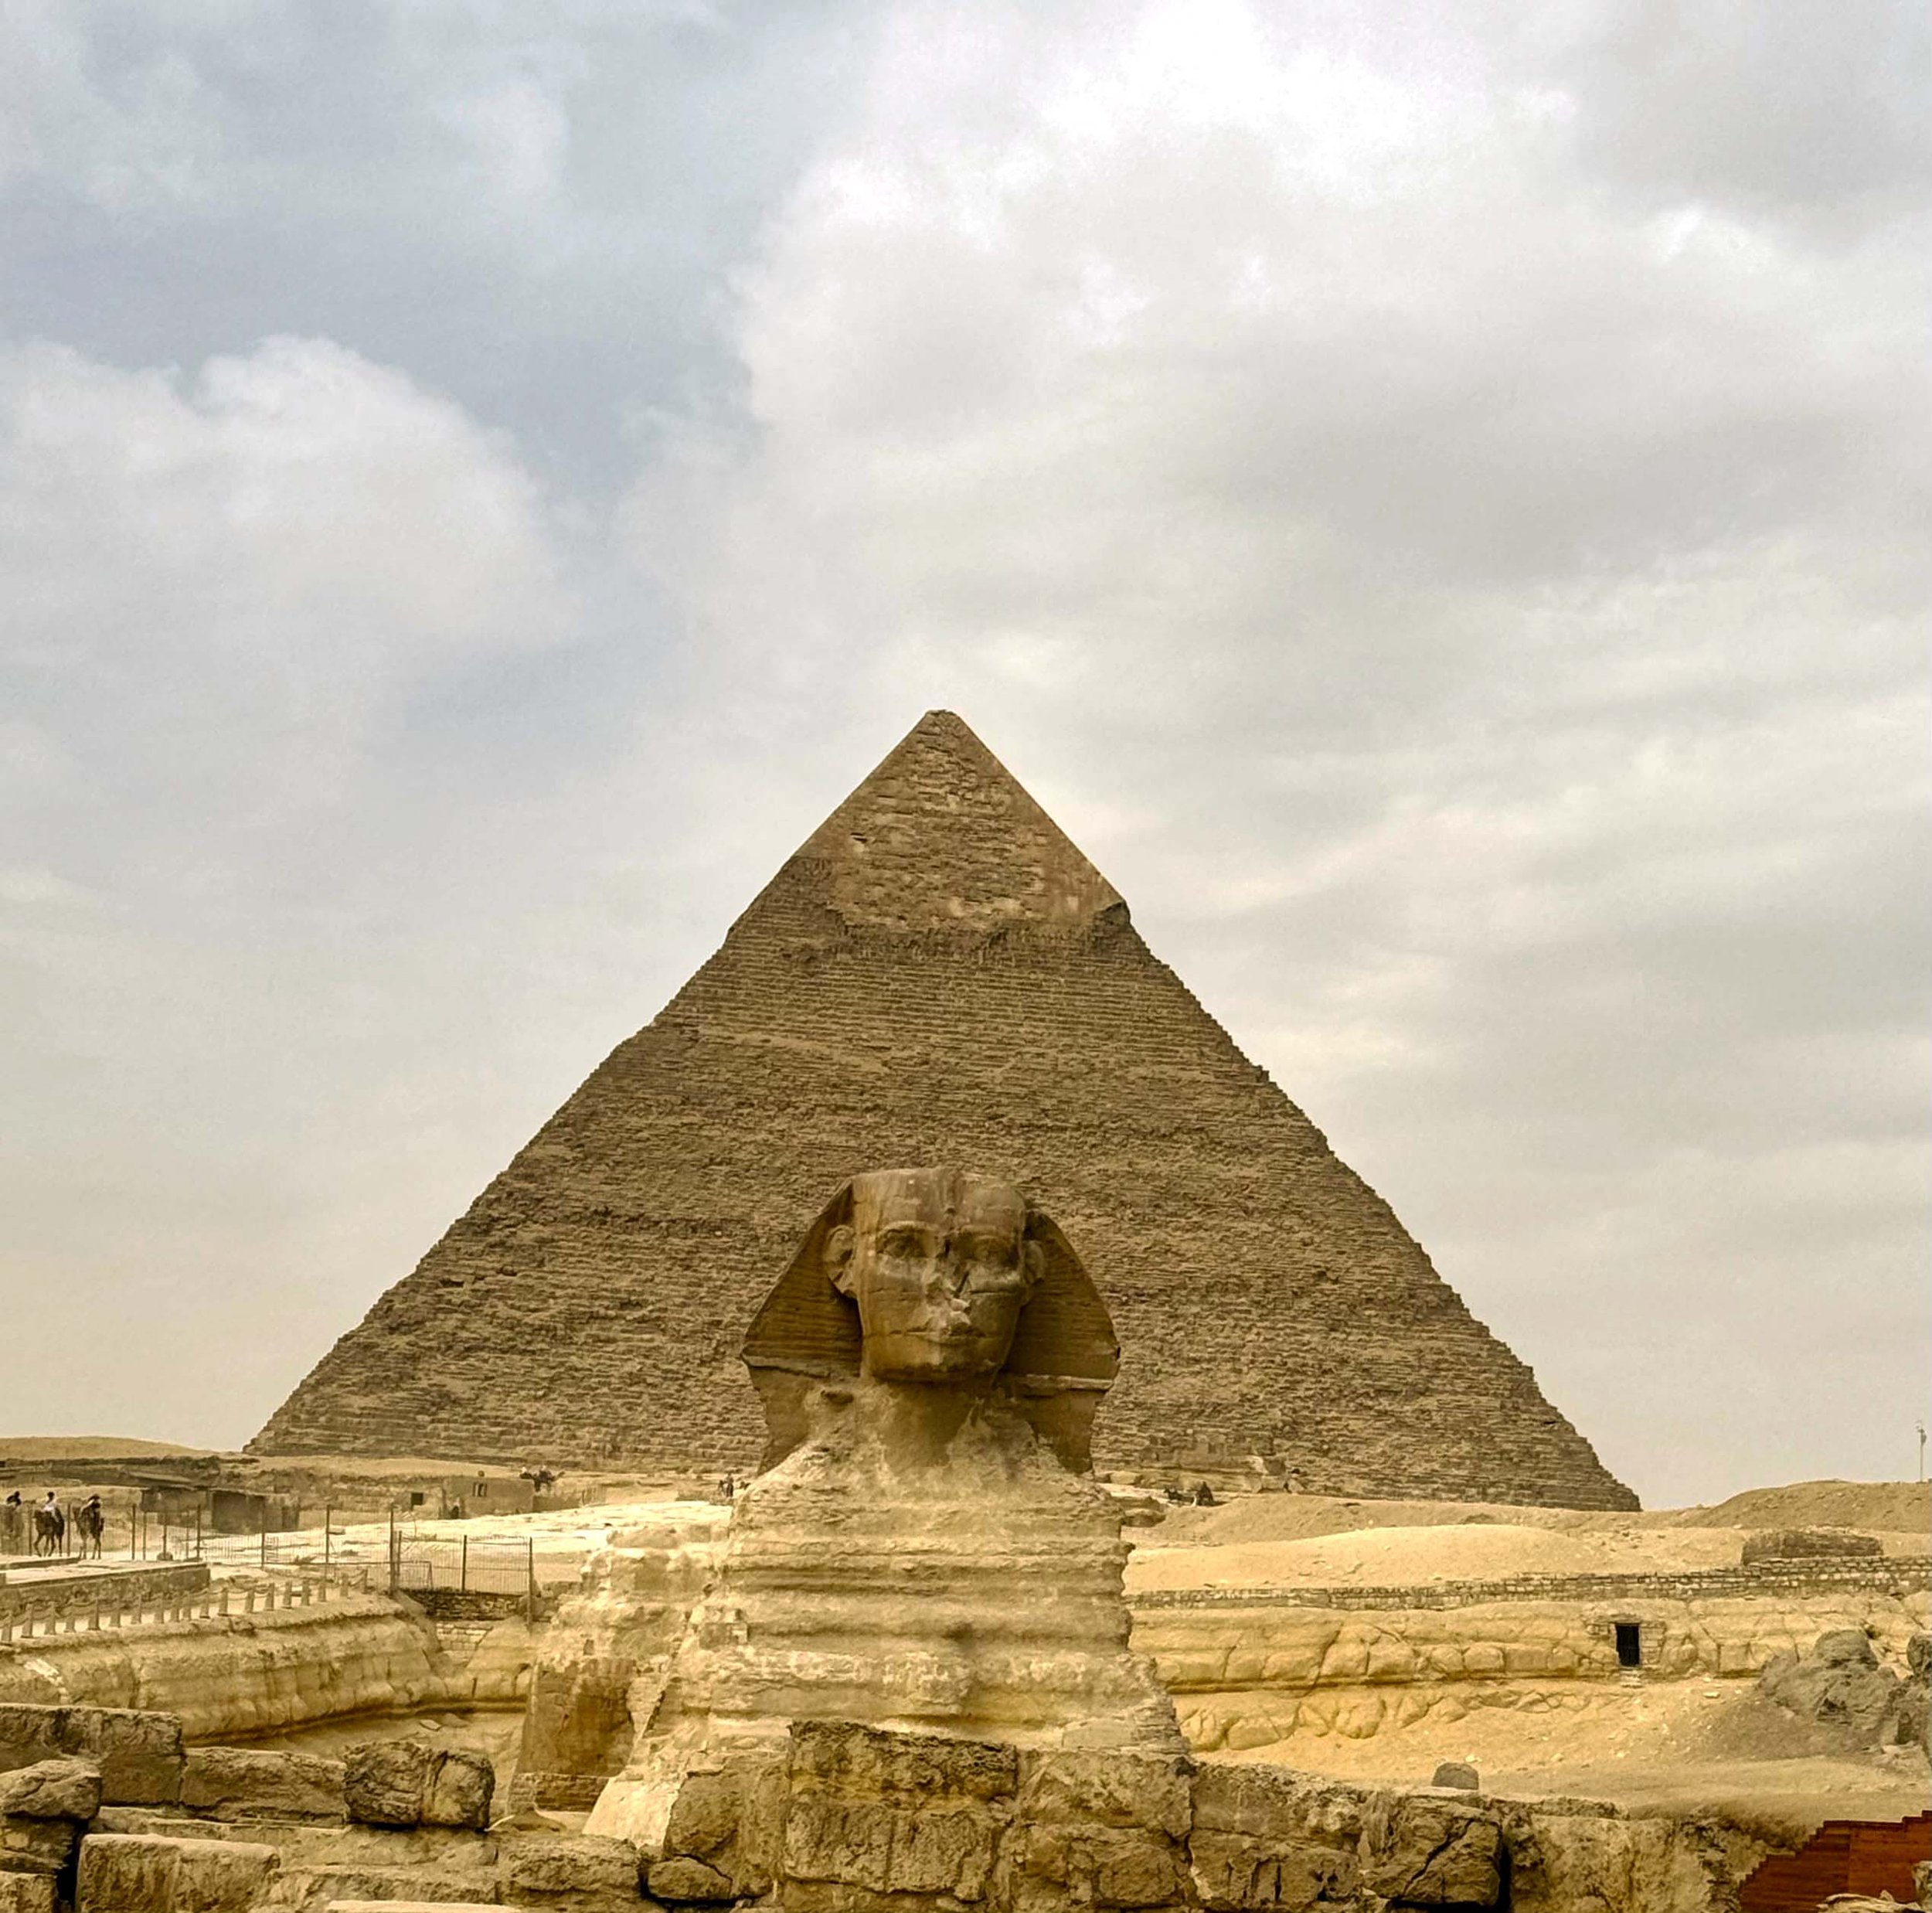 Sphinx and the Great Pyramid of Giza